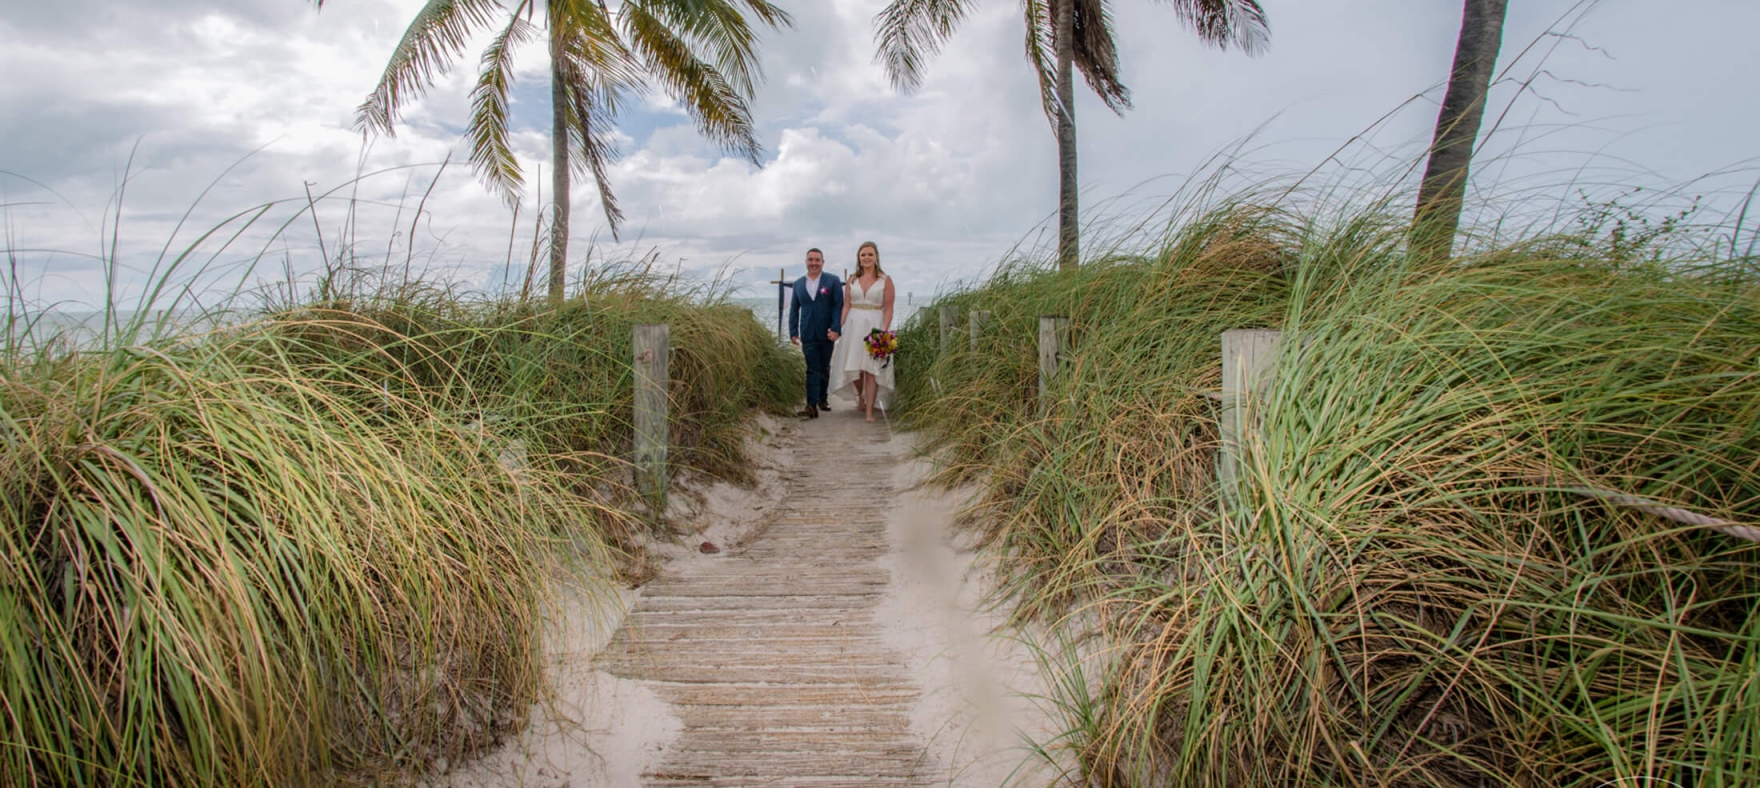 A long shot of the bride and groom standing in a pathway between lush greenery on a beach